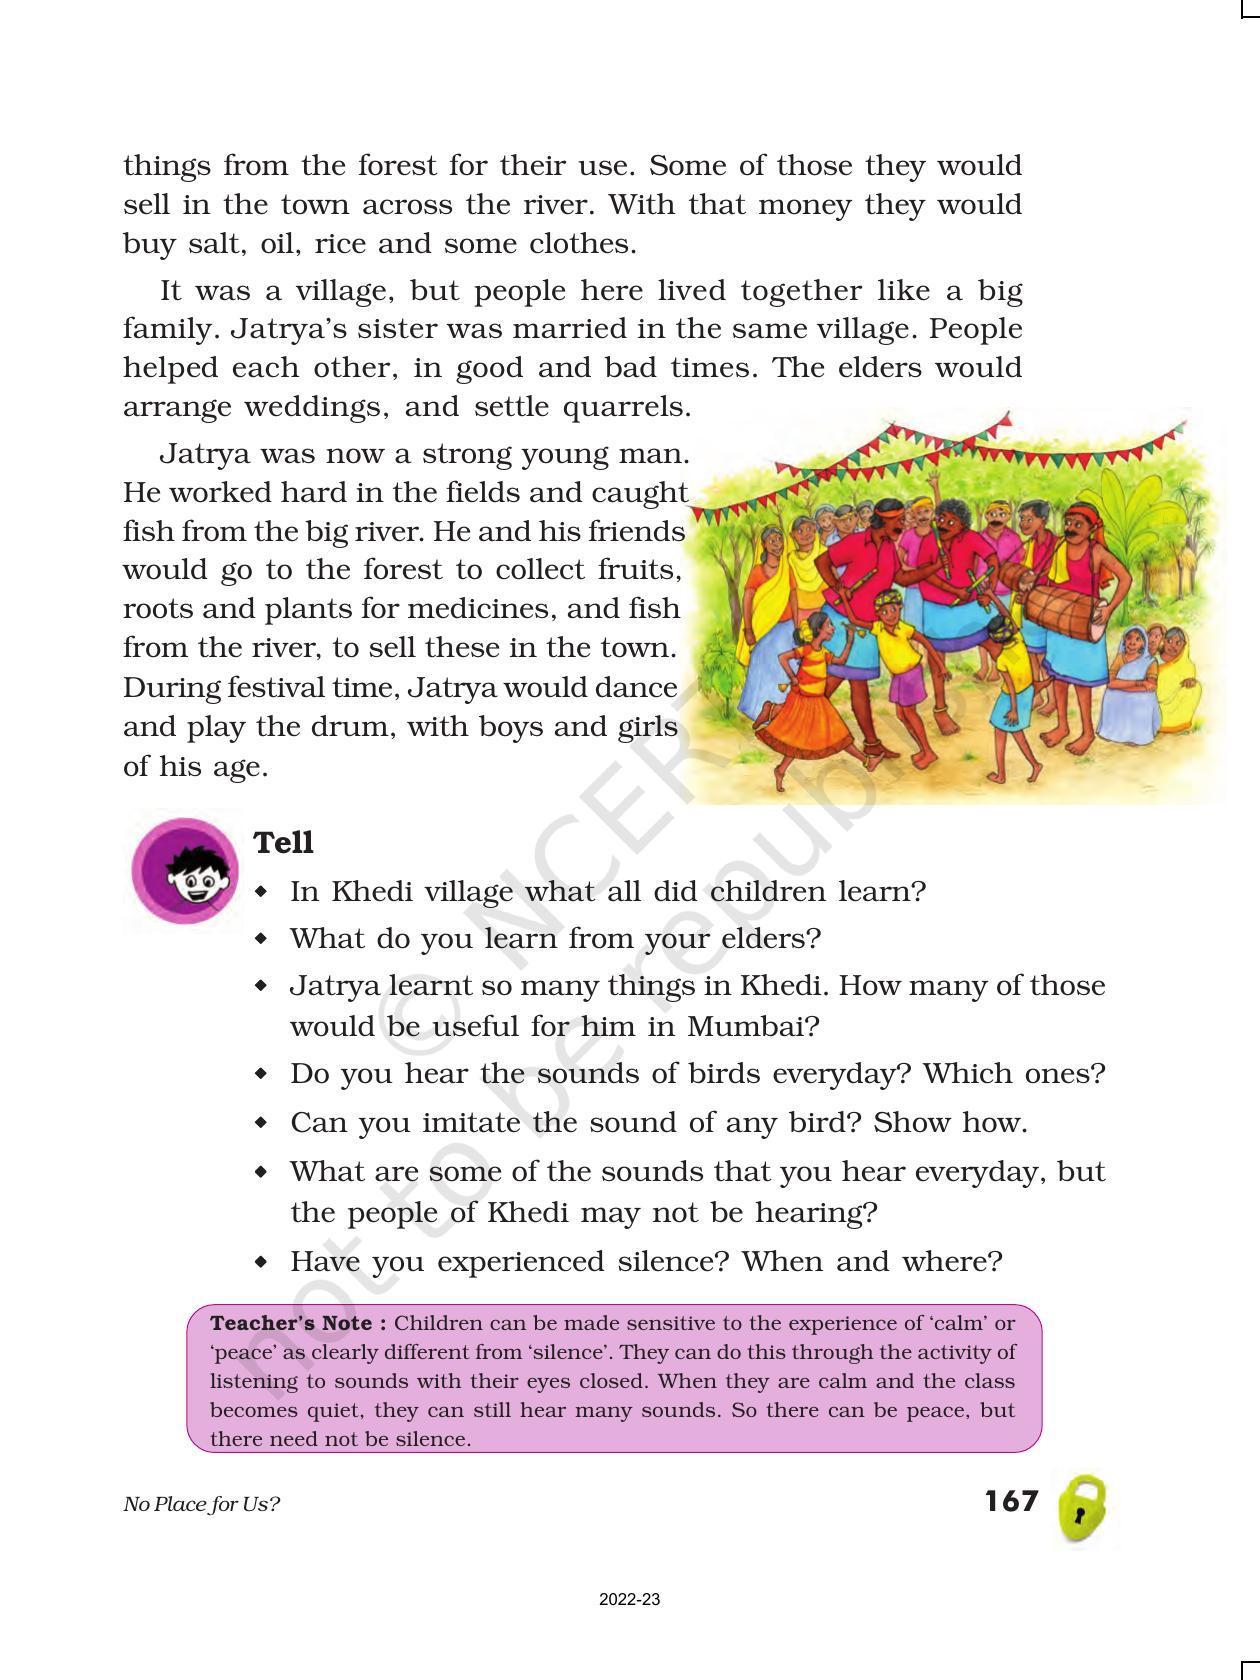 NCERT Book for Class 5 EVS Chapter 18 No Place for Us? - Page 3